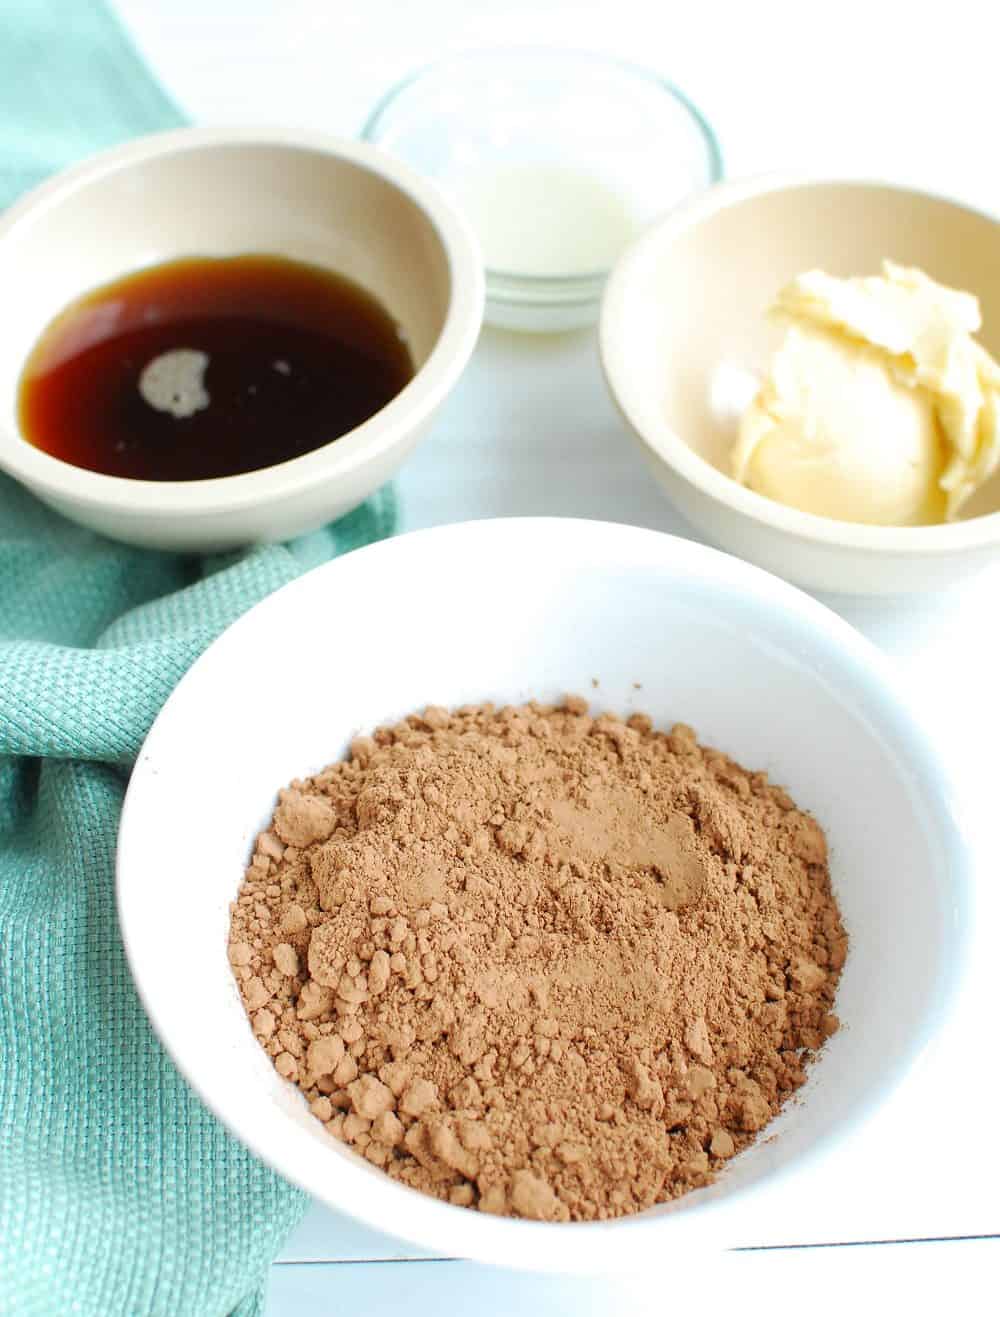 Cocoa powder, maple syrup, and vegan butter in bowls